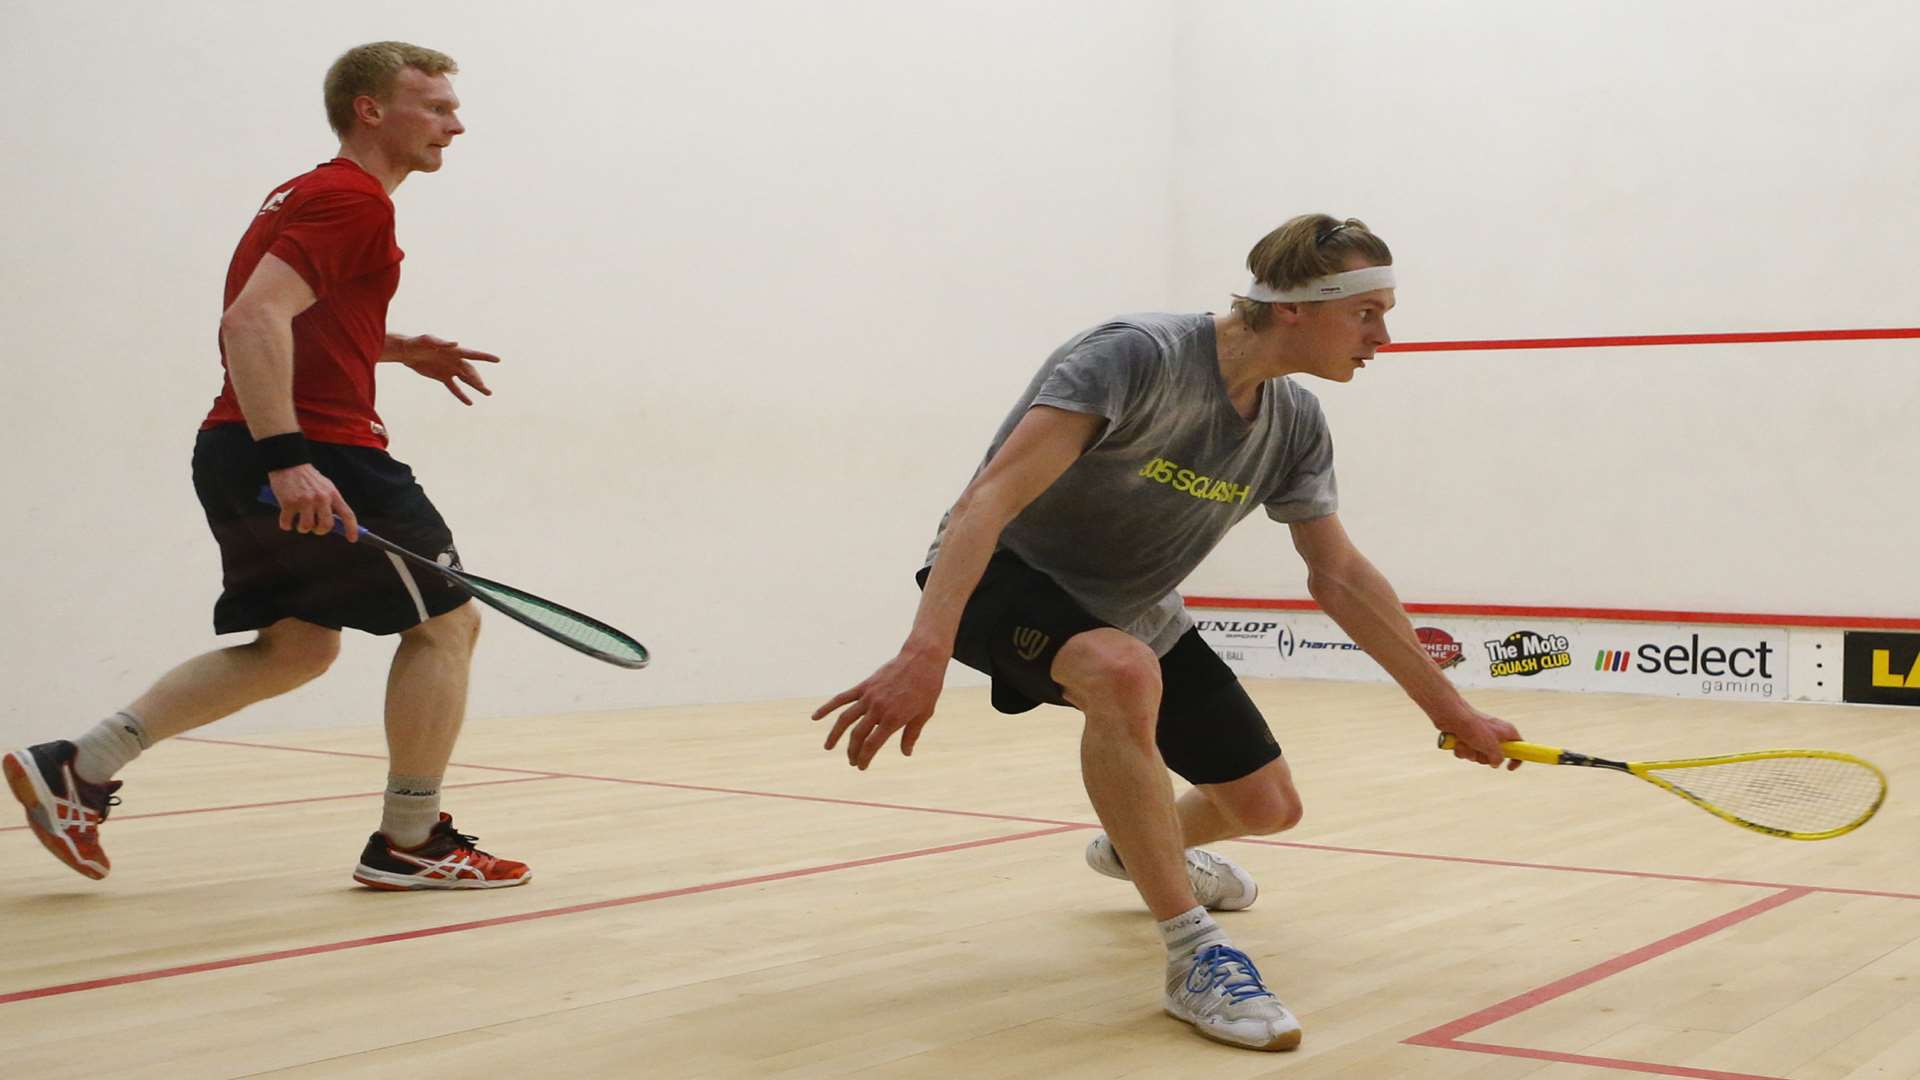 England's Tom Ford in command against Wales' Joel Hinds in the final of the Select Gaming Kent Open Picture: Andy Jones